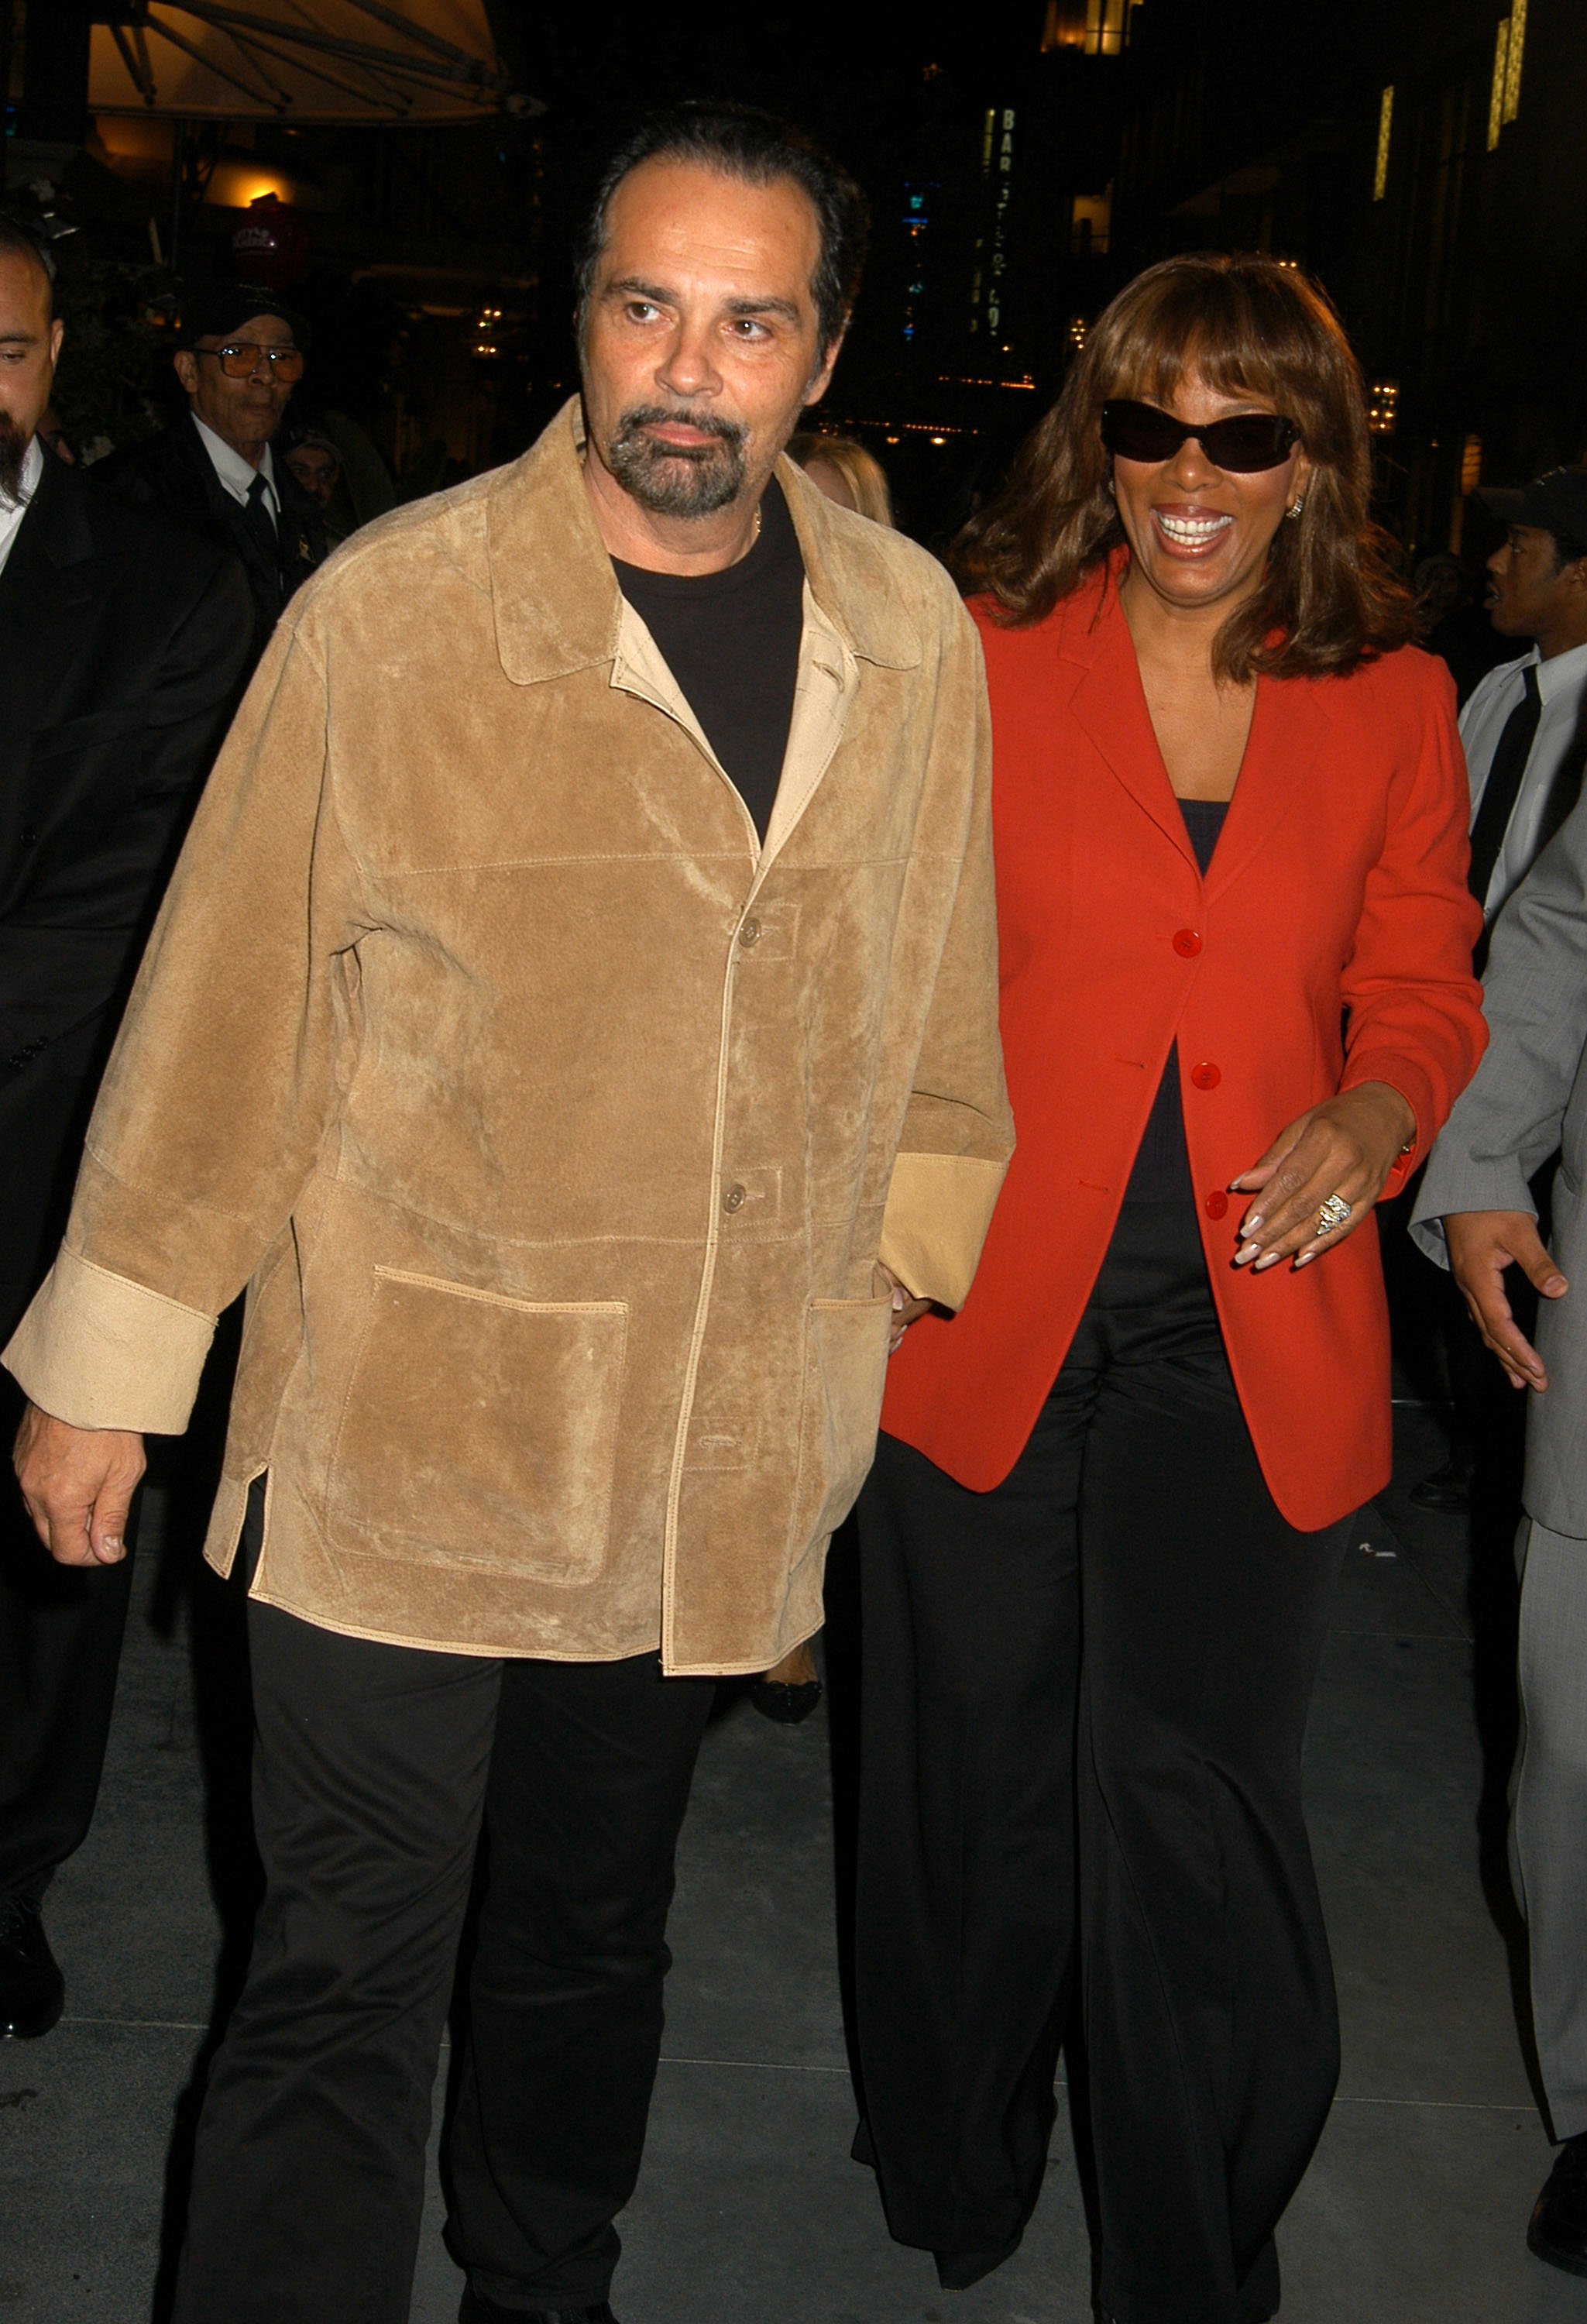 Bruce Sudano and wife Donna Summer during Driven By The Music: The Art Of Donna Summer Opening at The Grove in Los Angeles, California | Source: Getty Images